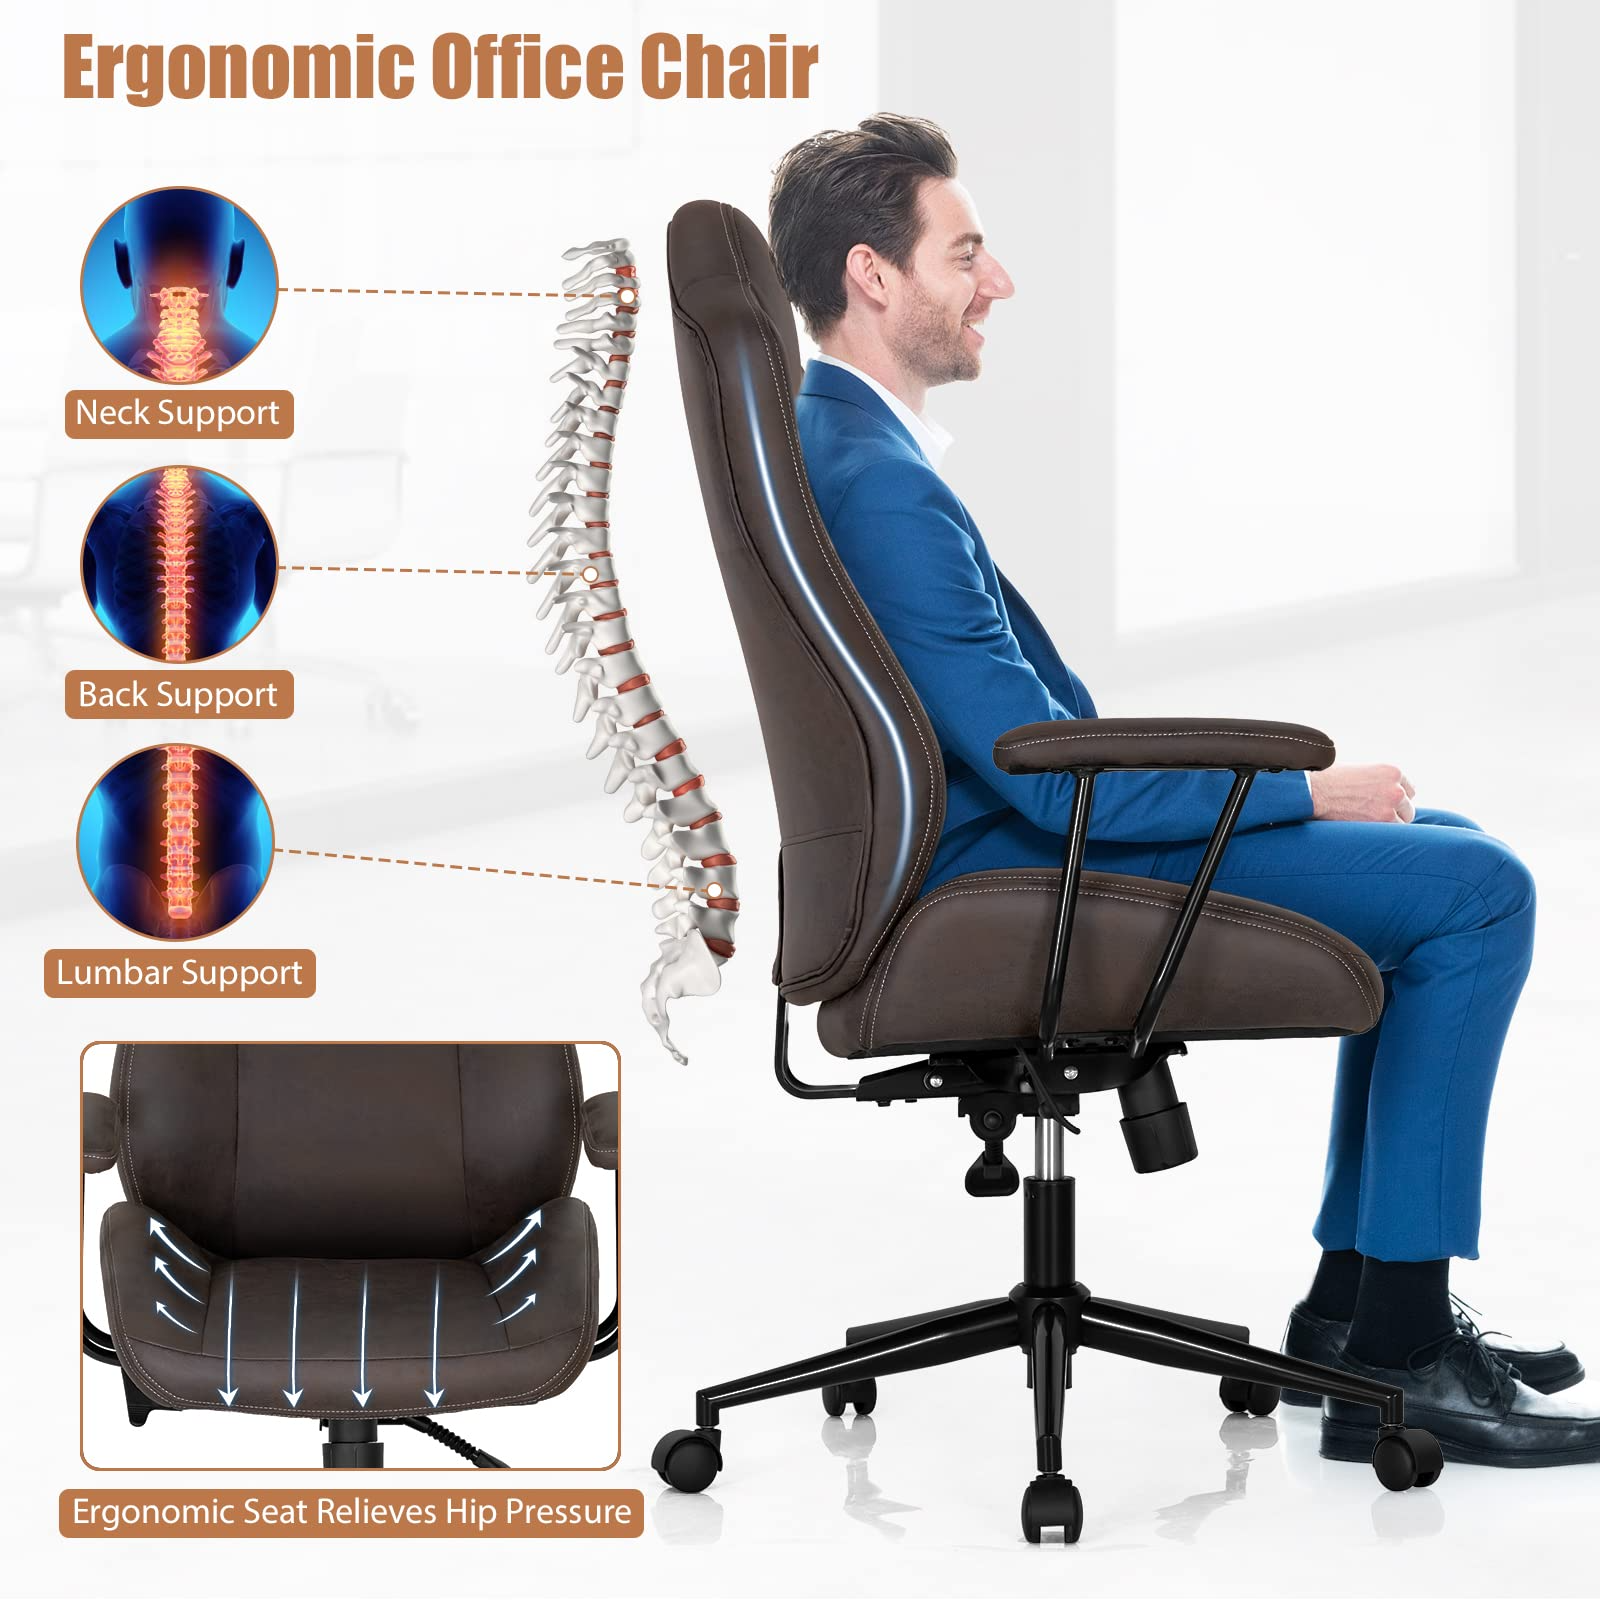 Ergonomic Leathaire Task Chair with Comfortable Padded Seat & Detachable Armrests